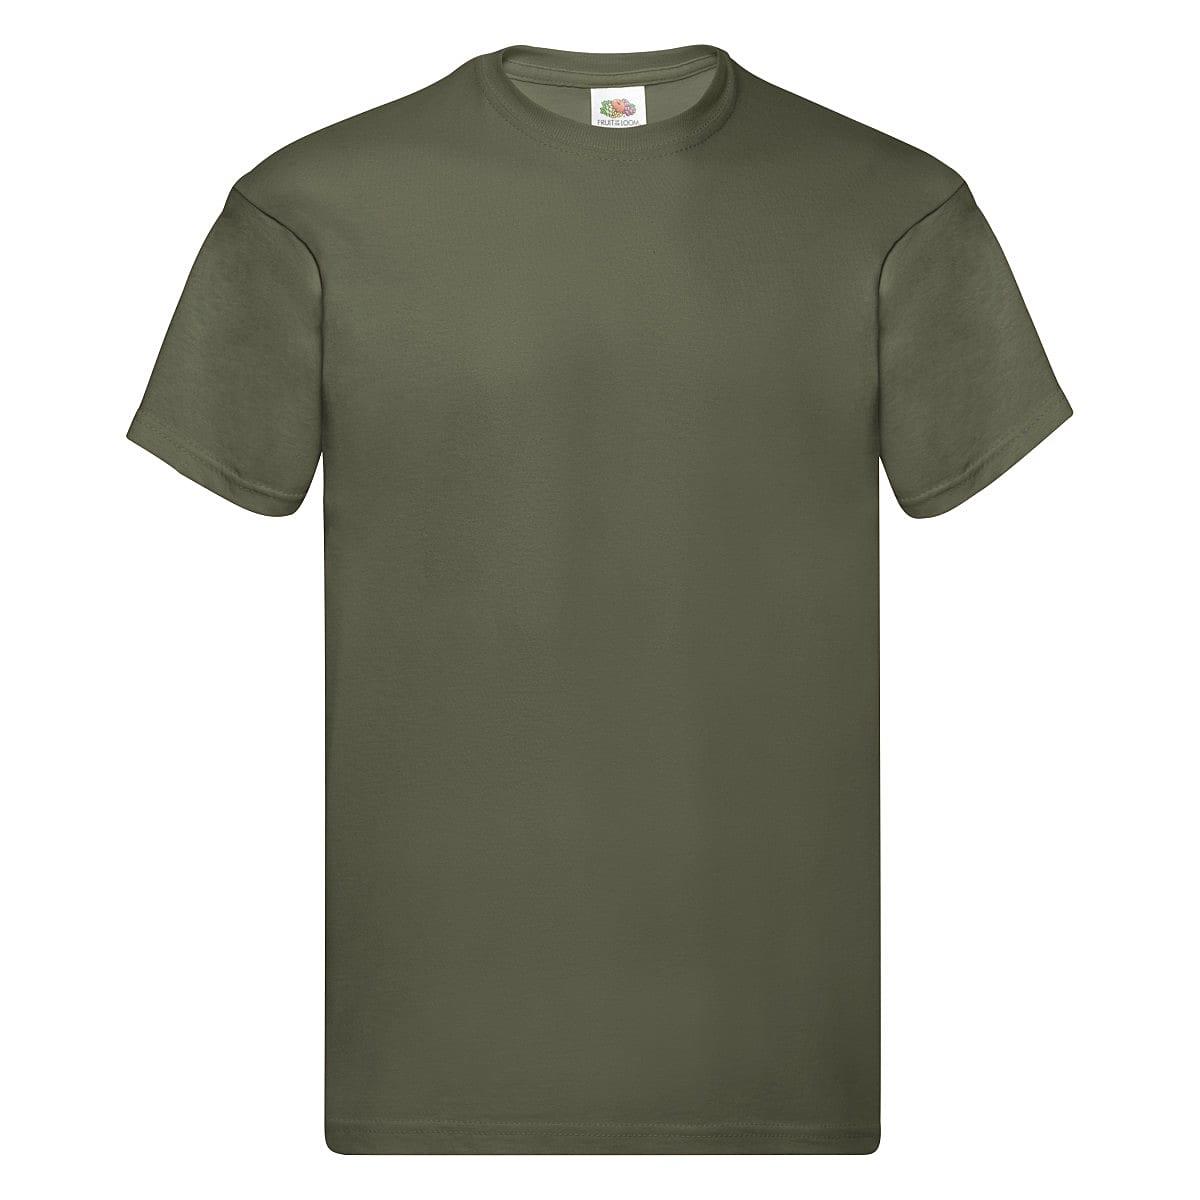 Fruit Of The Loom Original Full Cut T-Shirt in Classic Olive (Product Code: 61082)